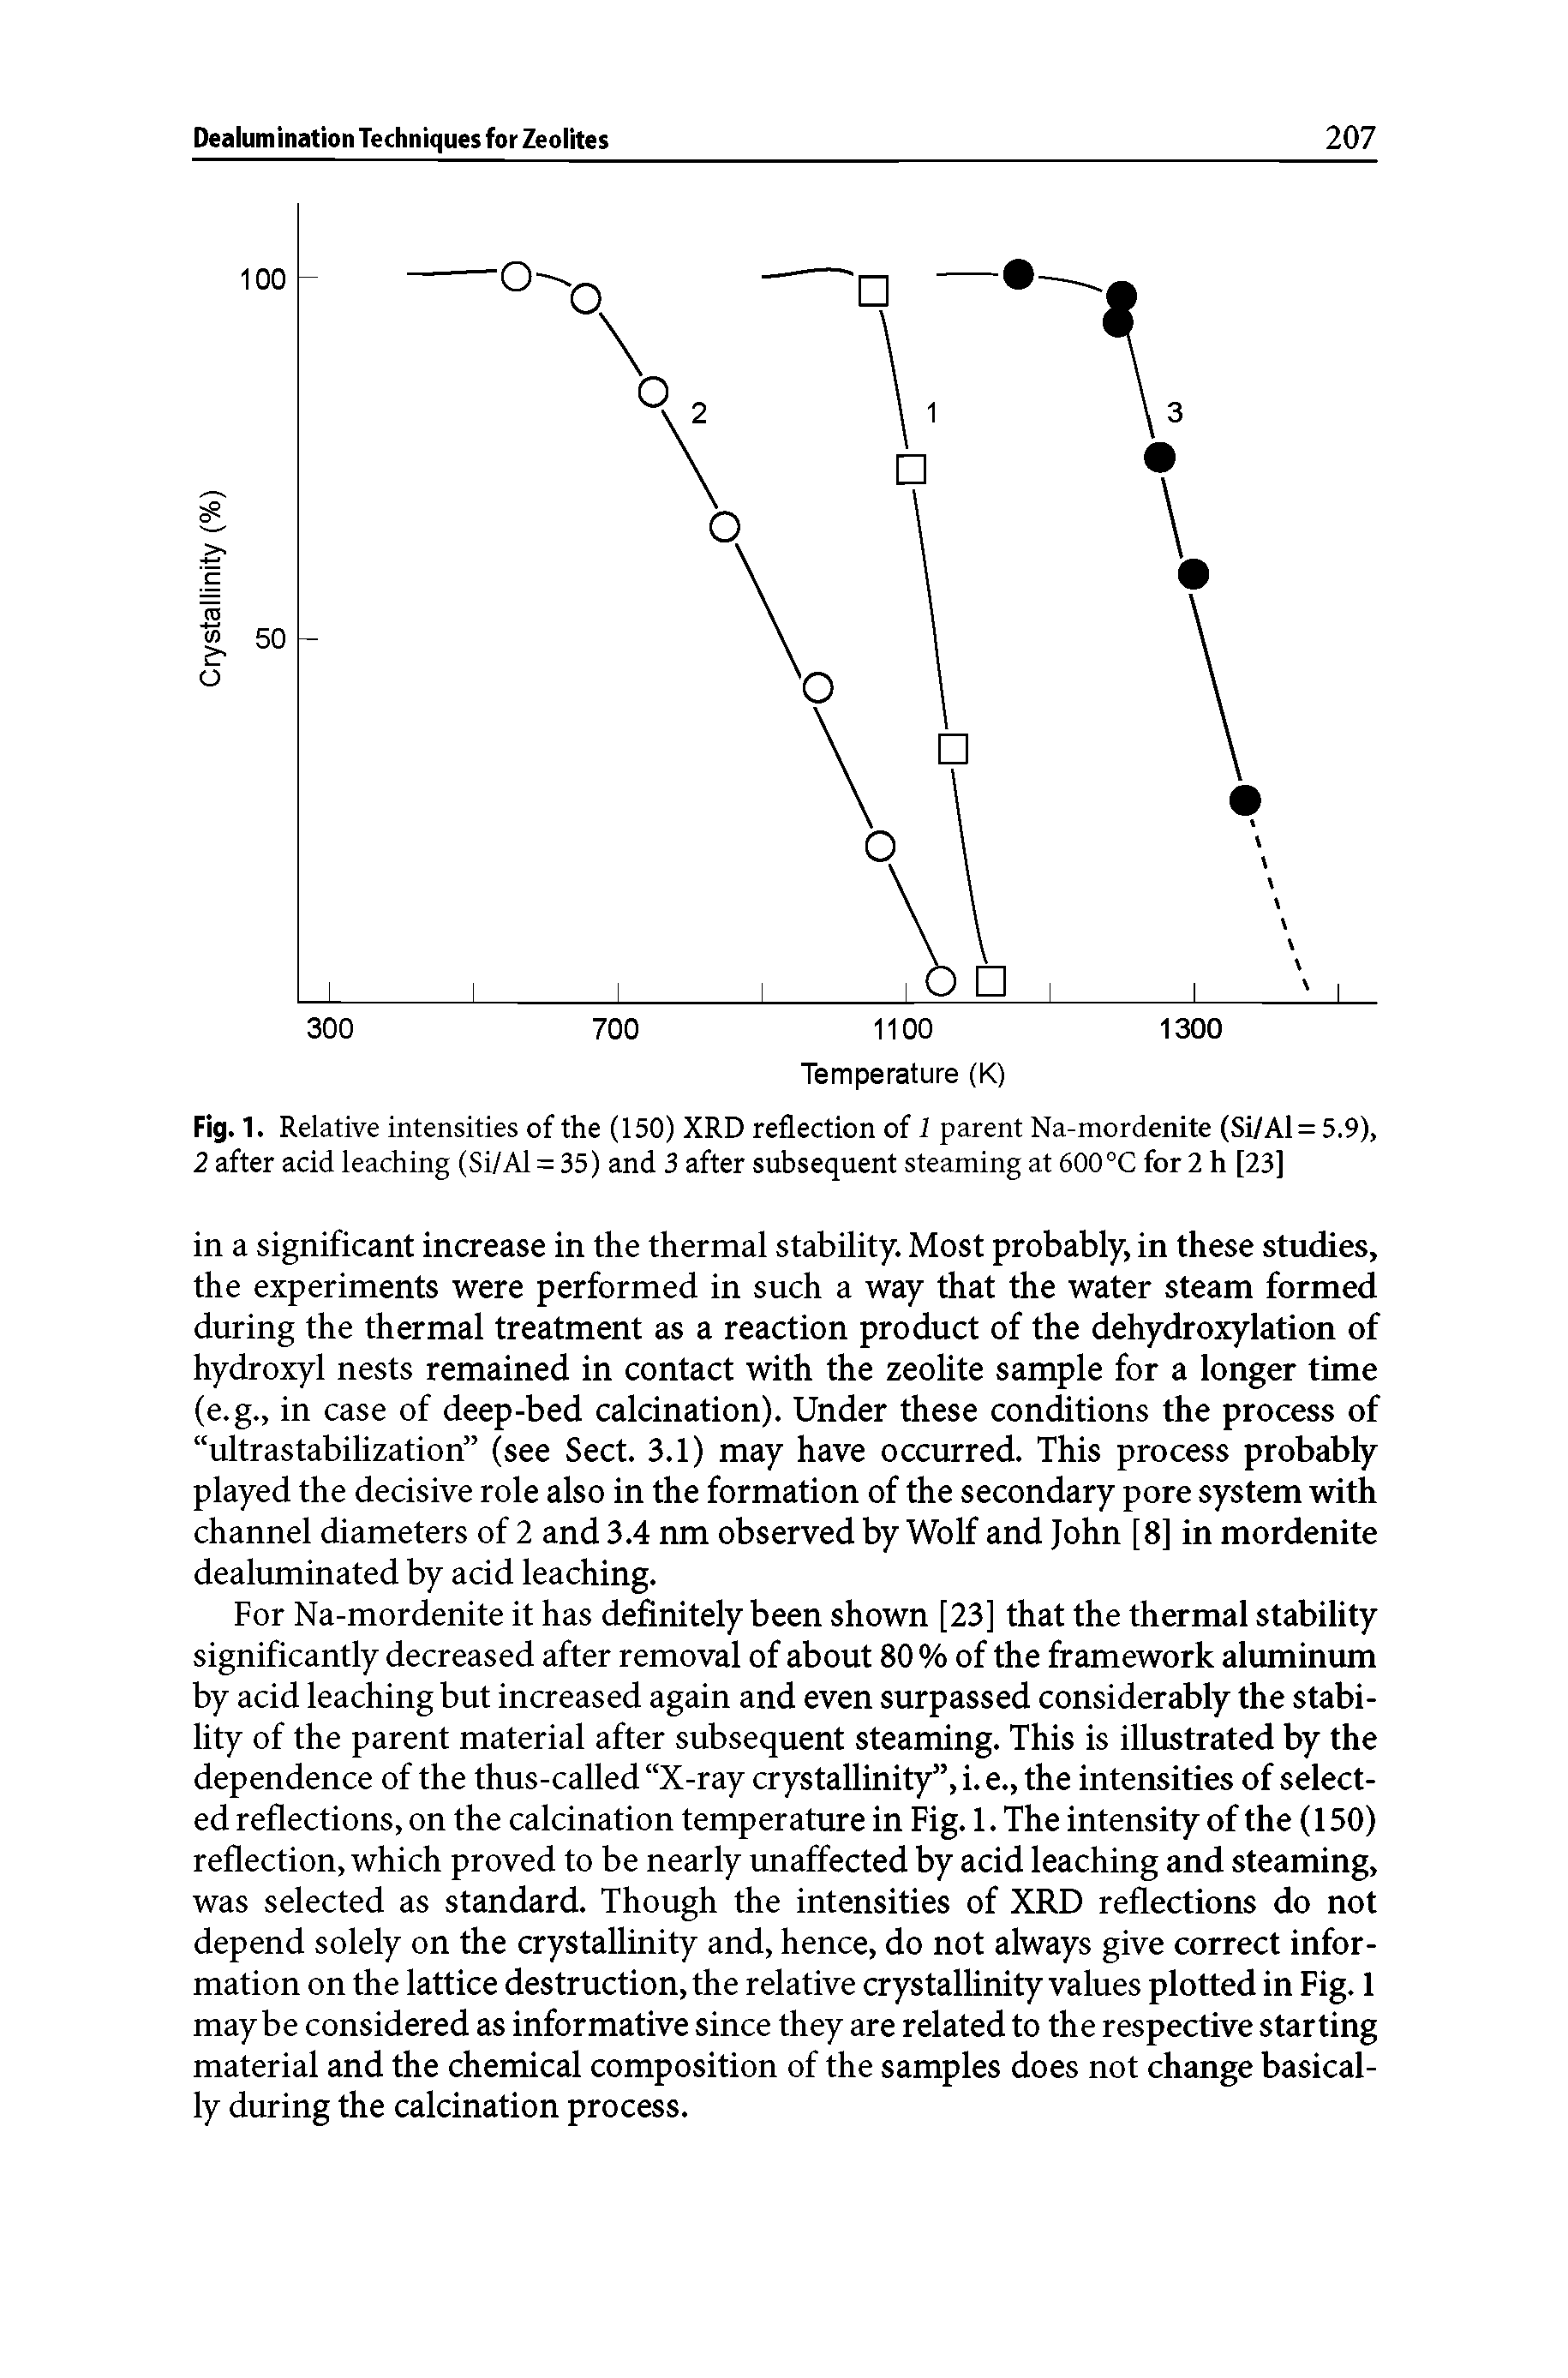 Fig.1. Relative intensities of the (150) XRD reflection of 1 parent Na-mordenite (Si/Al = 5.9), 2 after acid leaching (Si/Al = 35) and 3 after subsequent steaming at 600°C for 2 h [23]...